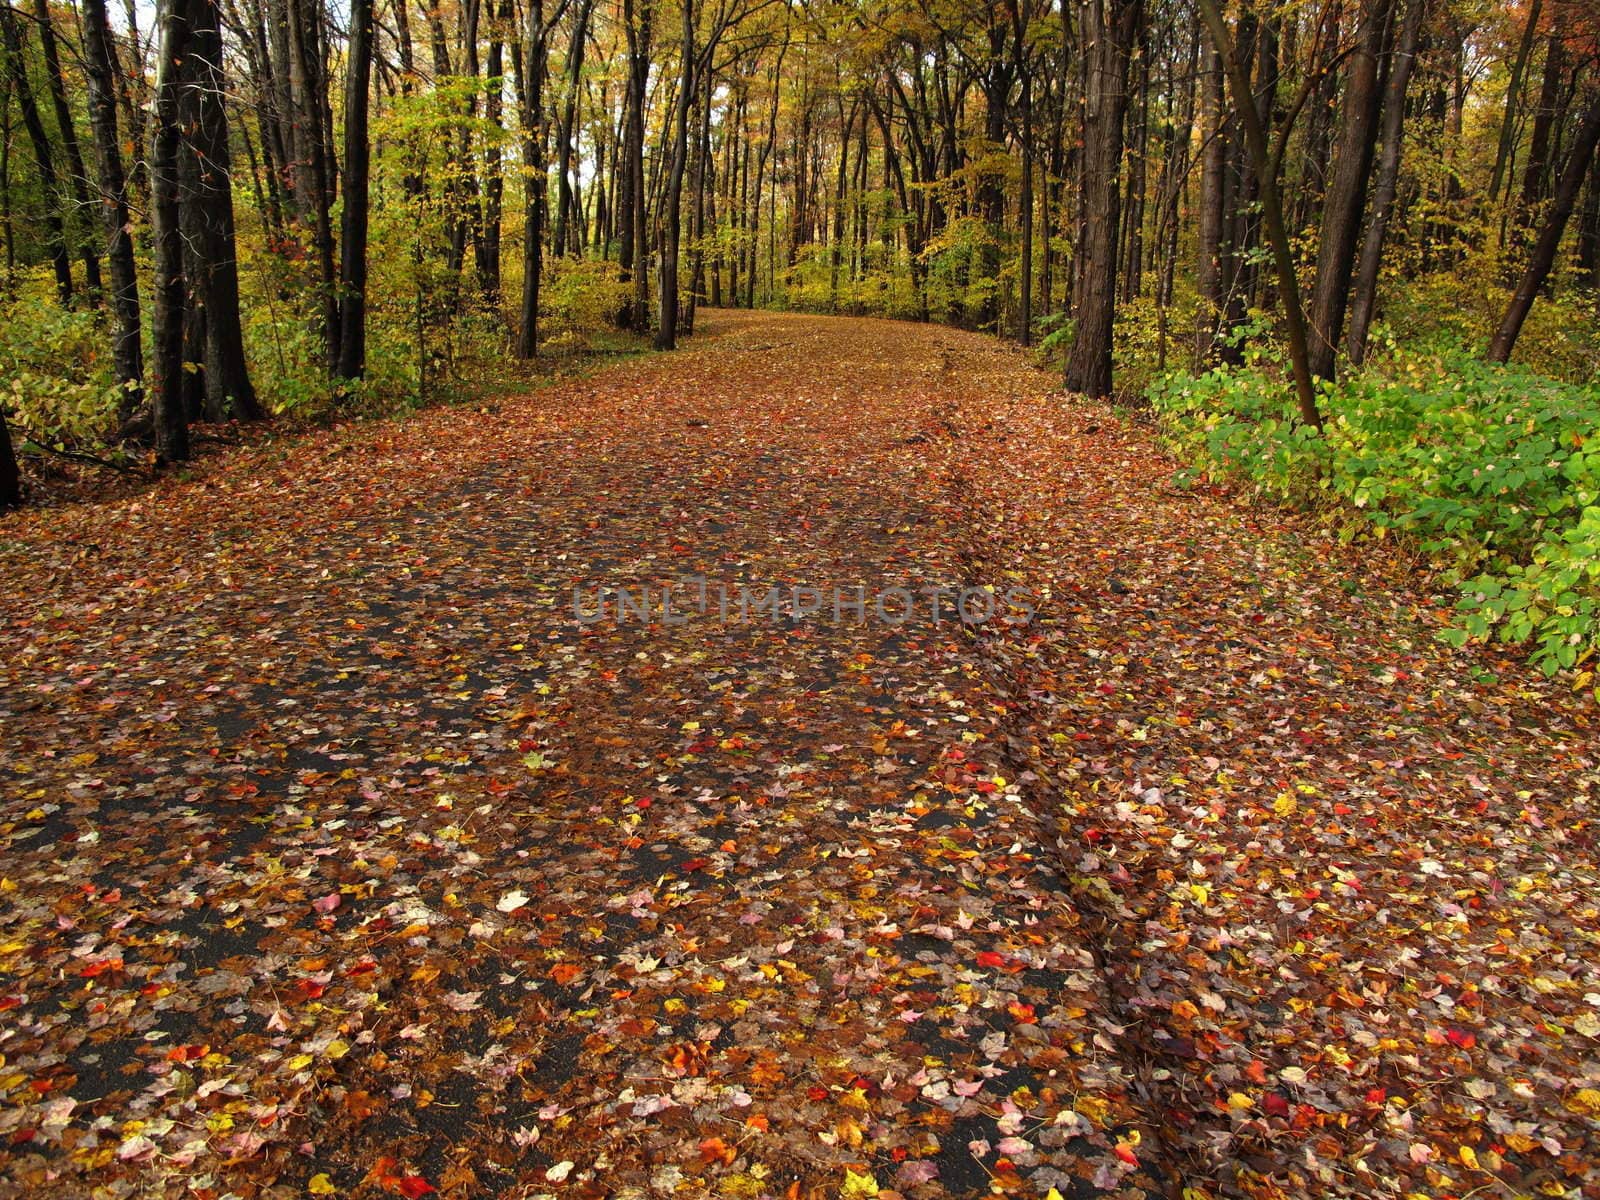 Autumn colors highlight pathway through a forest